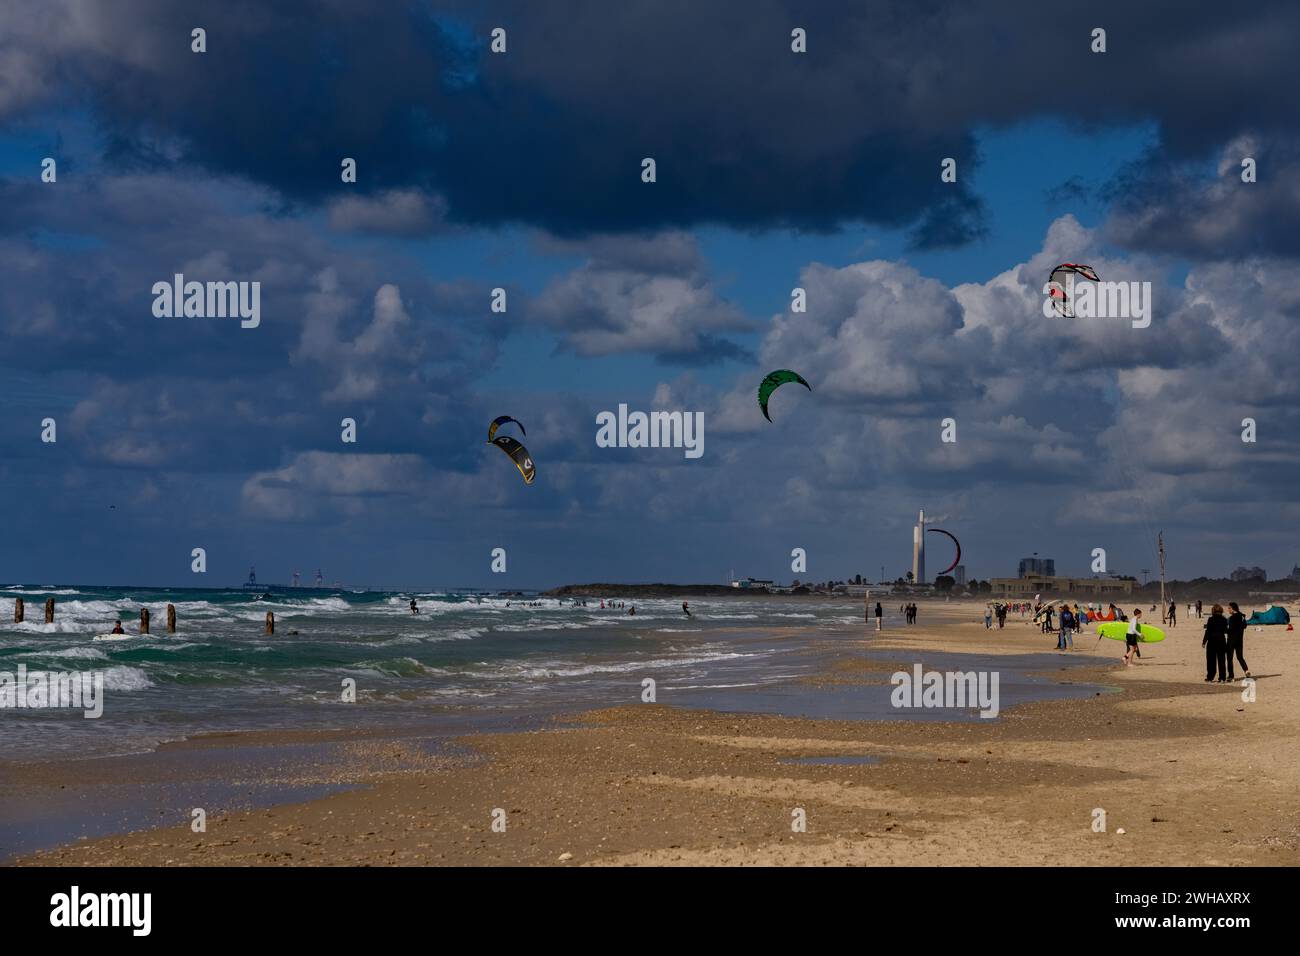 watersports enthusiasts with various form of surfing and sailing Photographed at the beach of Beit Yanai, Israel Beit Yanai is a moshav in central Isr Stock Photo